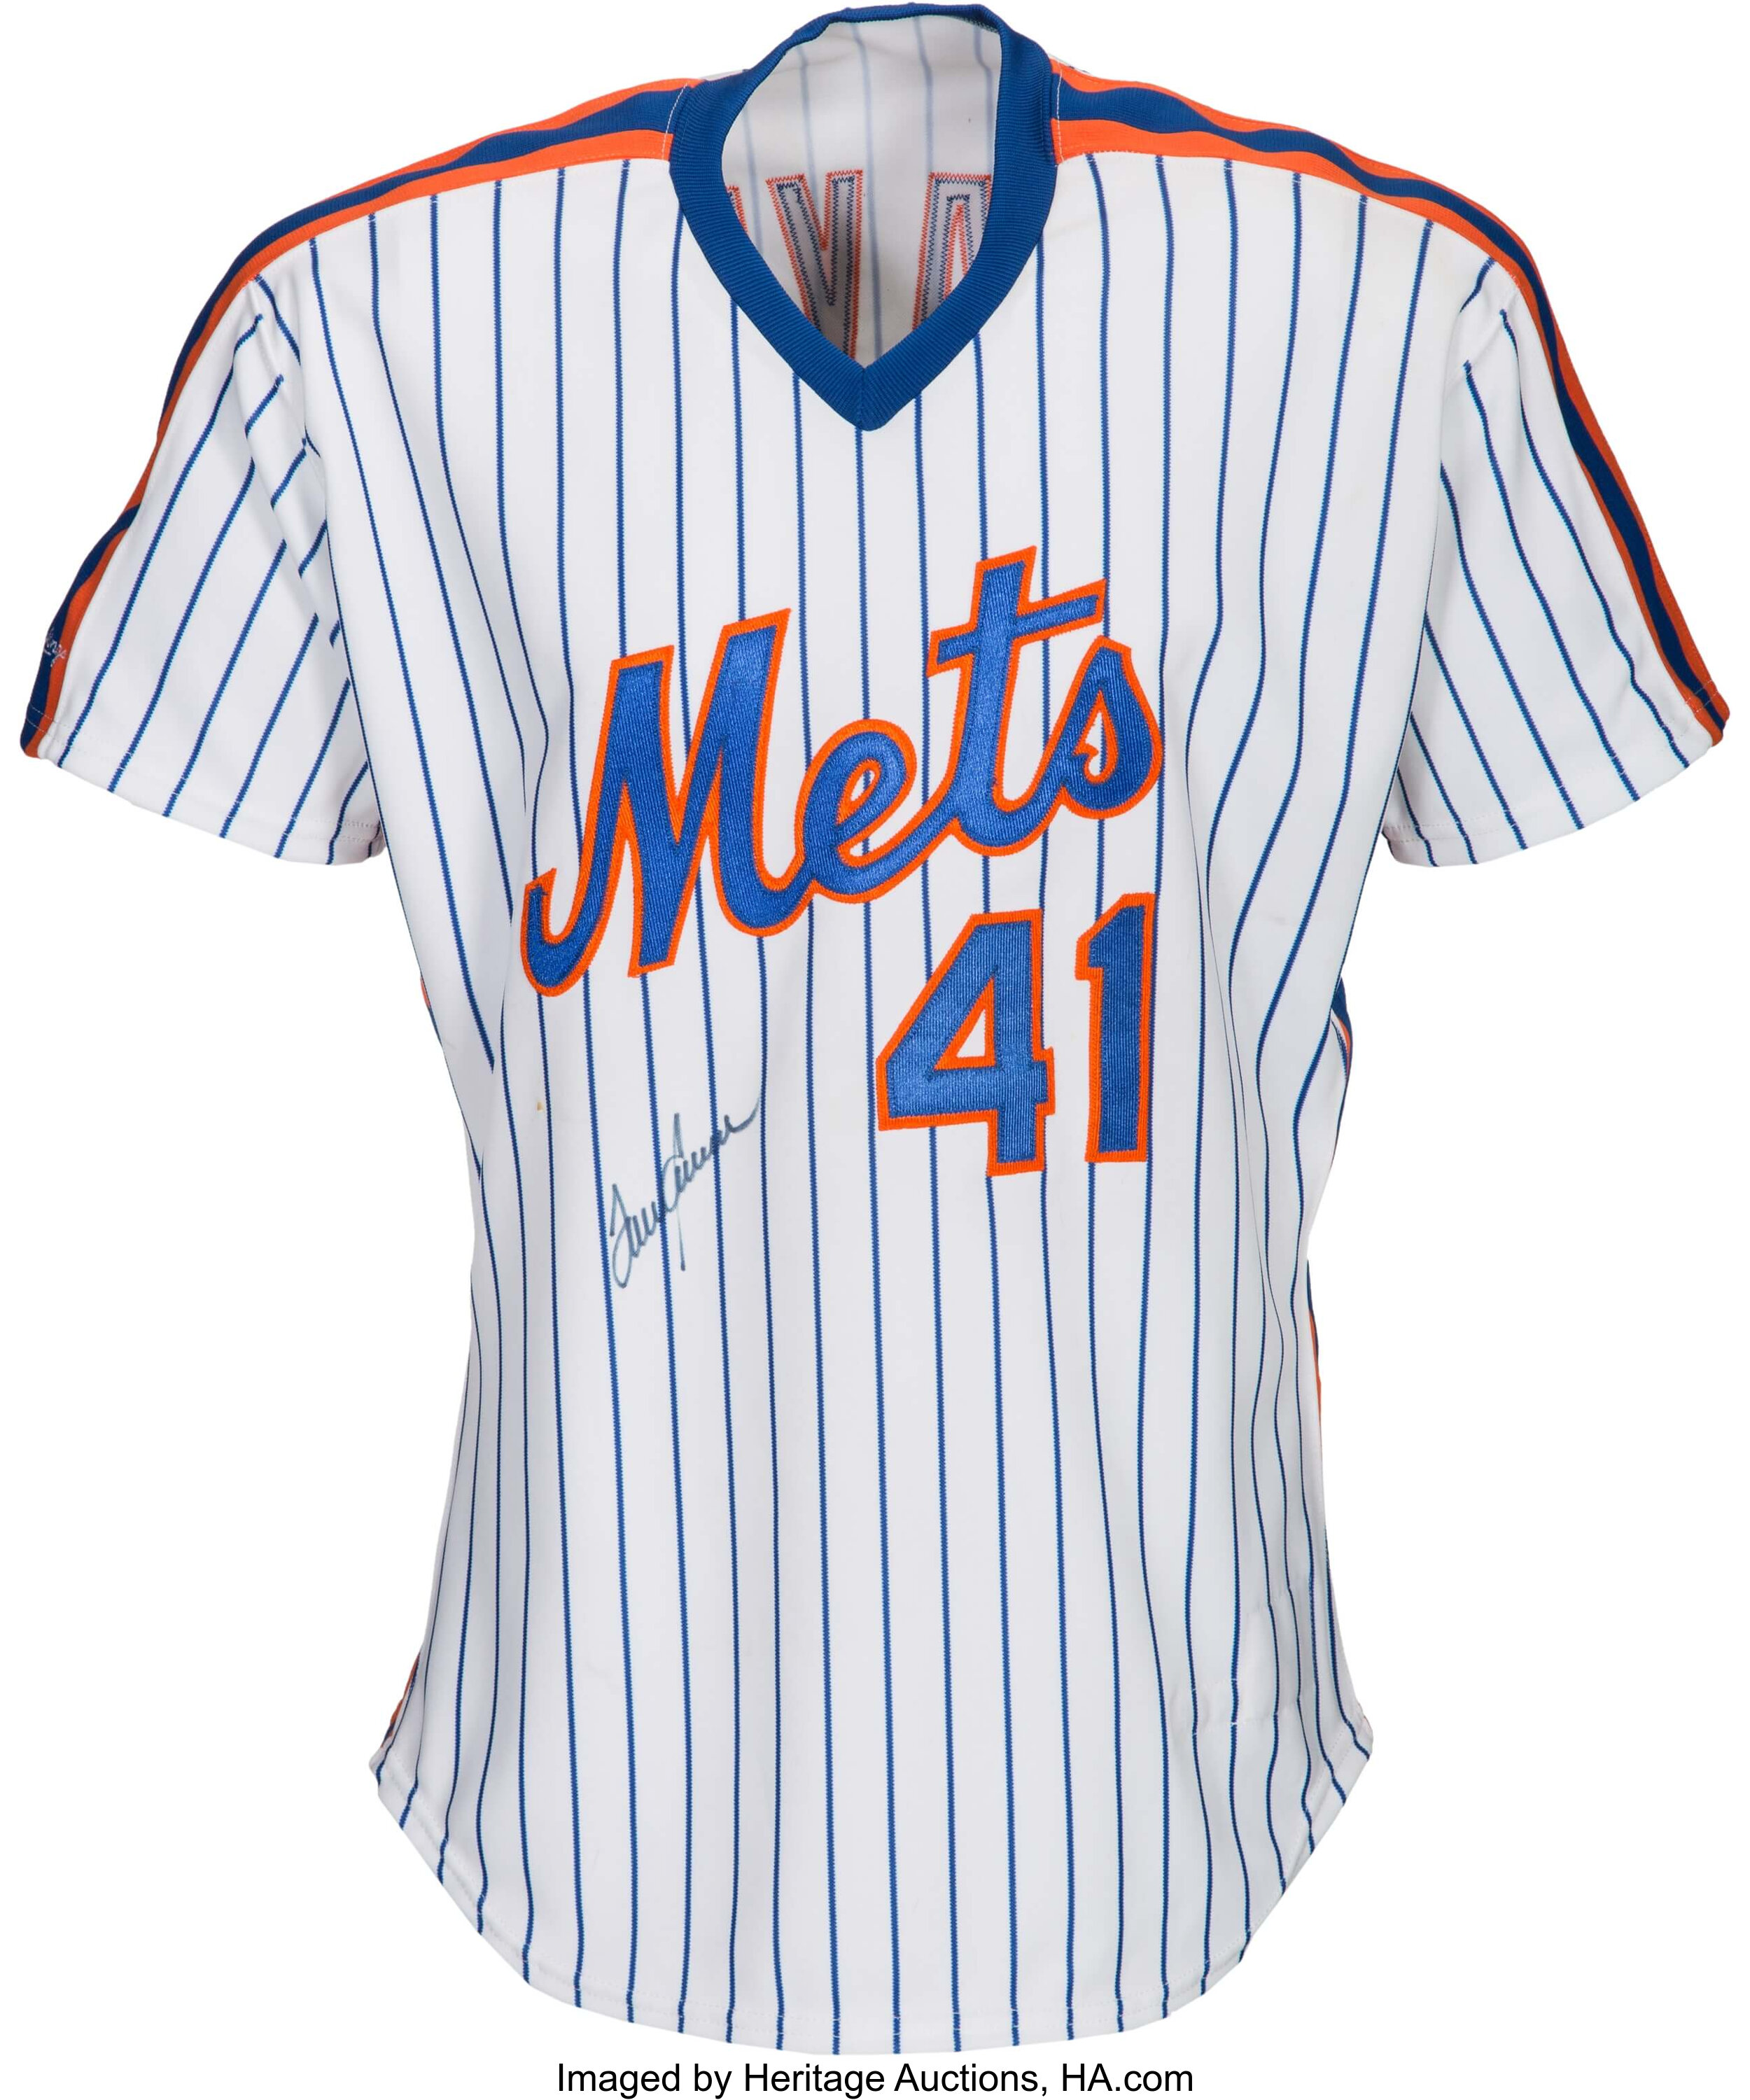 Vintage New York Mets Tom Seaver Jersey. Size XL. $50. Available